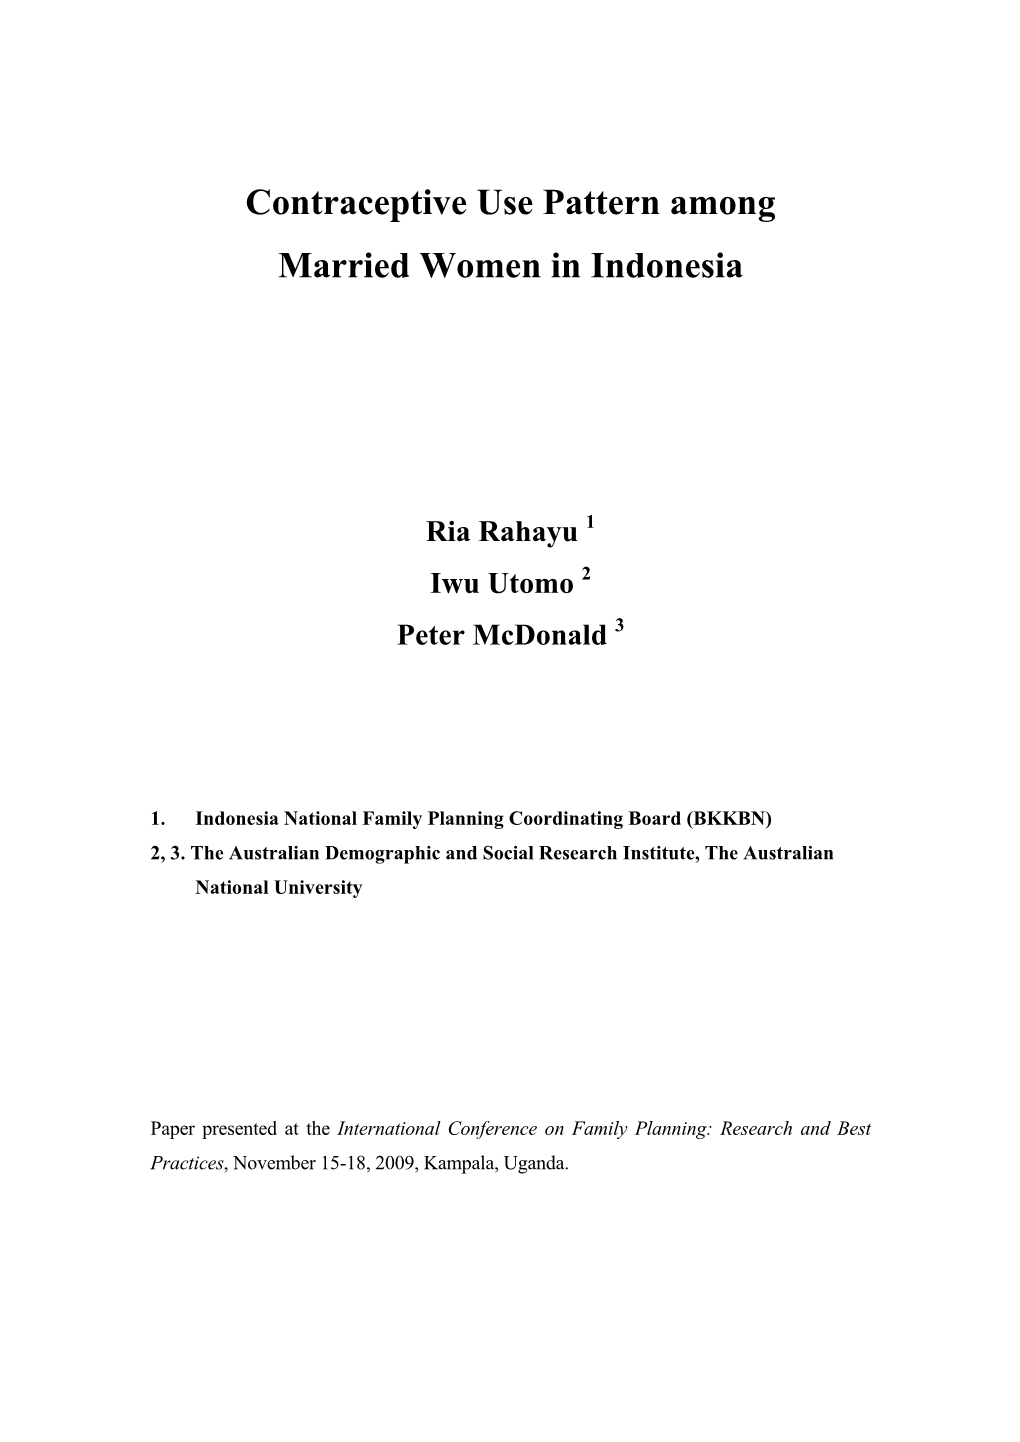 Contraceptive Use Pattern Among Married Women in Indonesia